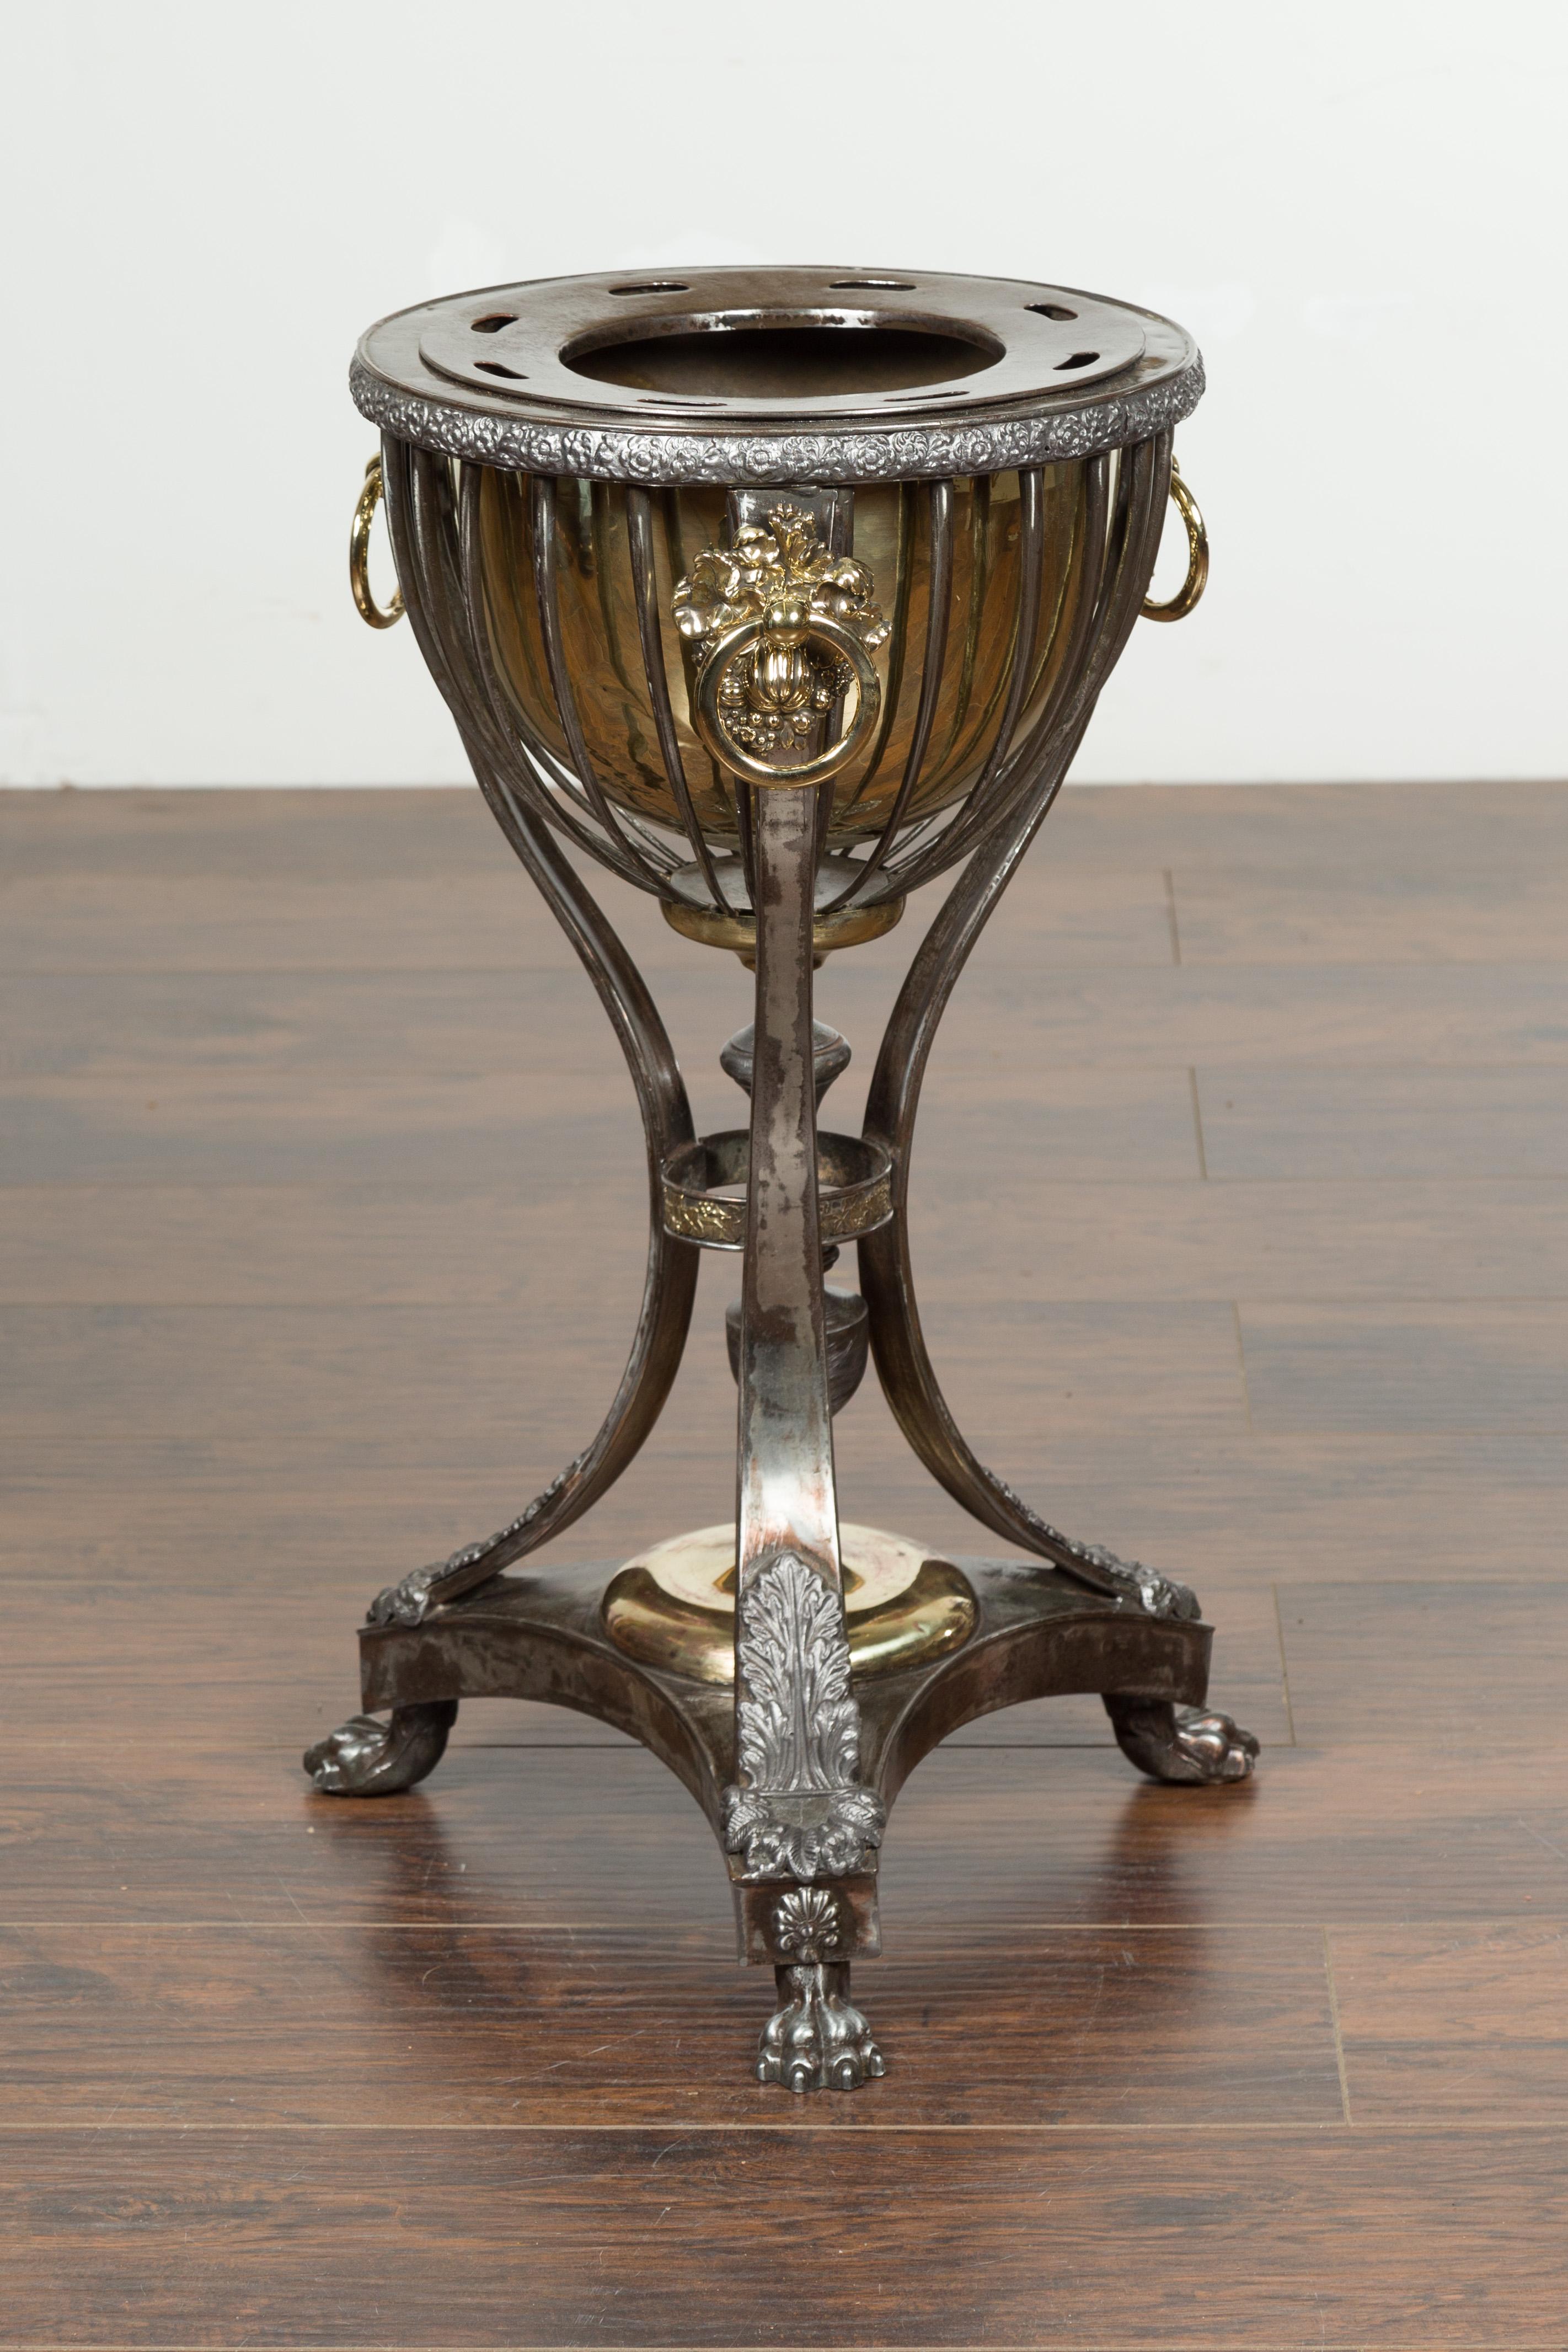 English 1820s Steel and Brass Tripod Wine Cooler with Foliage and Fruit Motifs For Sale 7